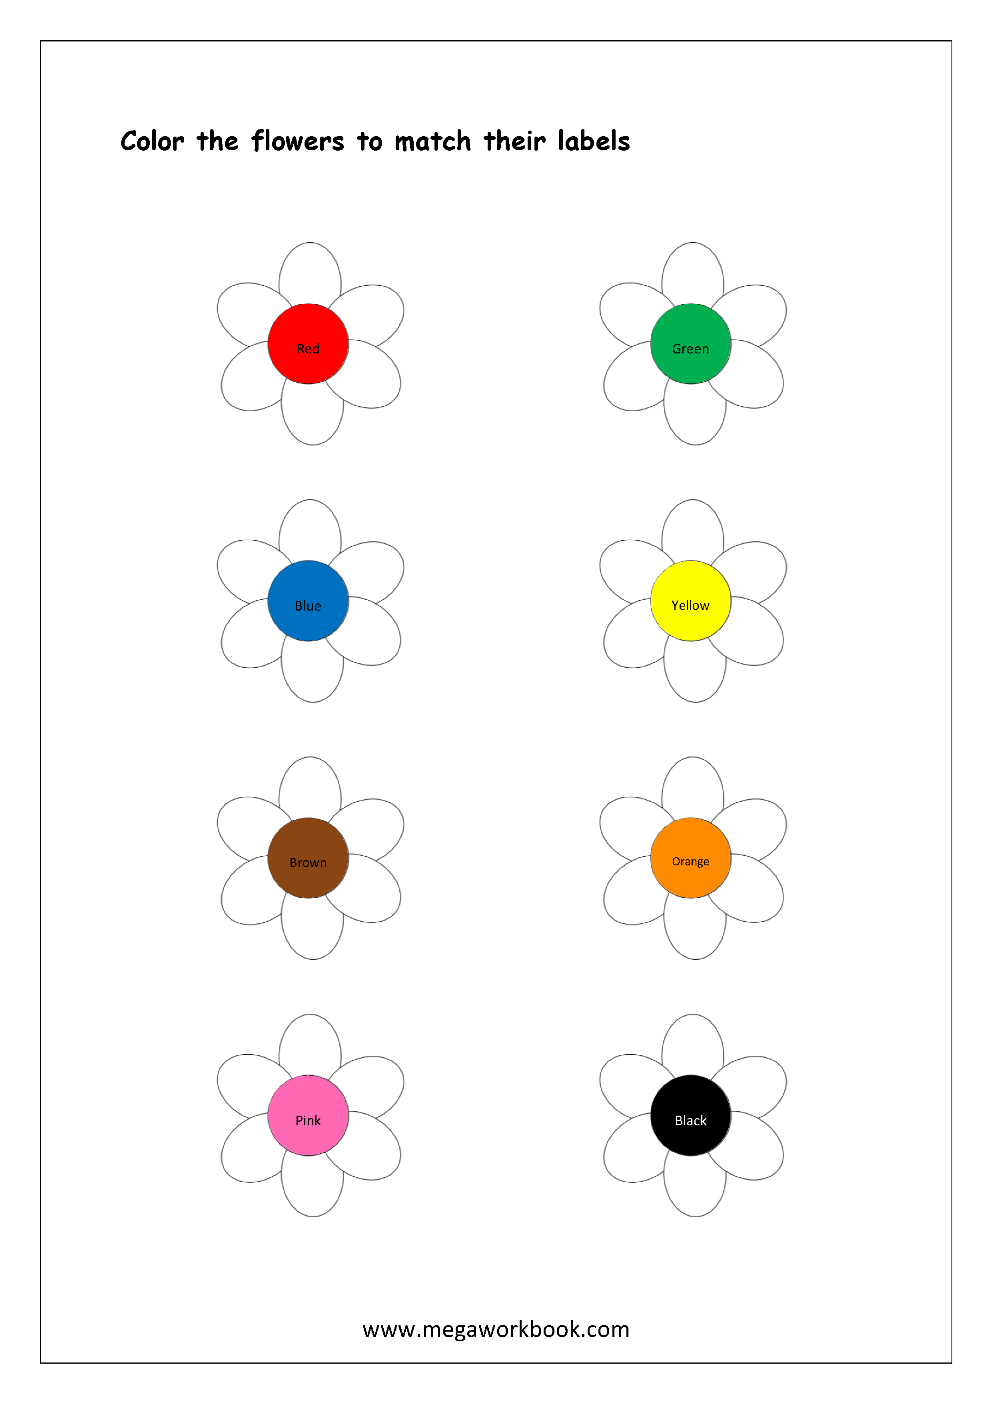 Free Printable Color Recognition Worksheets Color By Matching Hint Color Megaworkbook